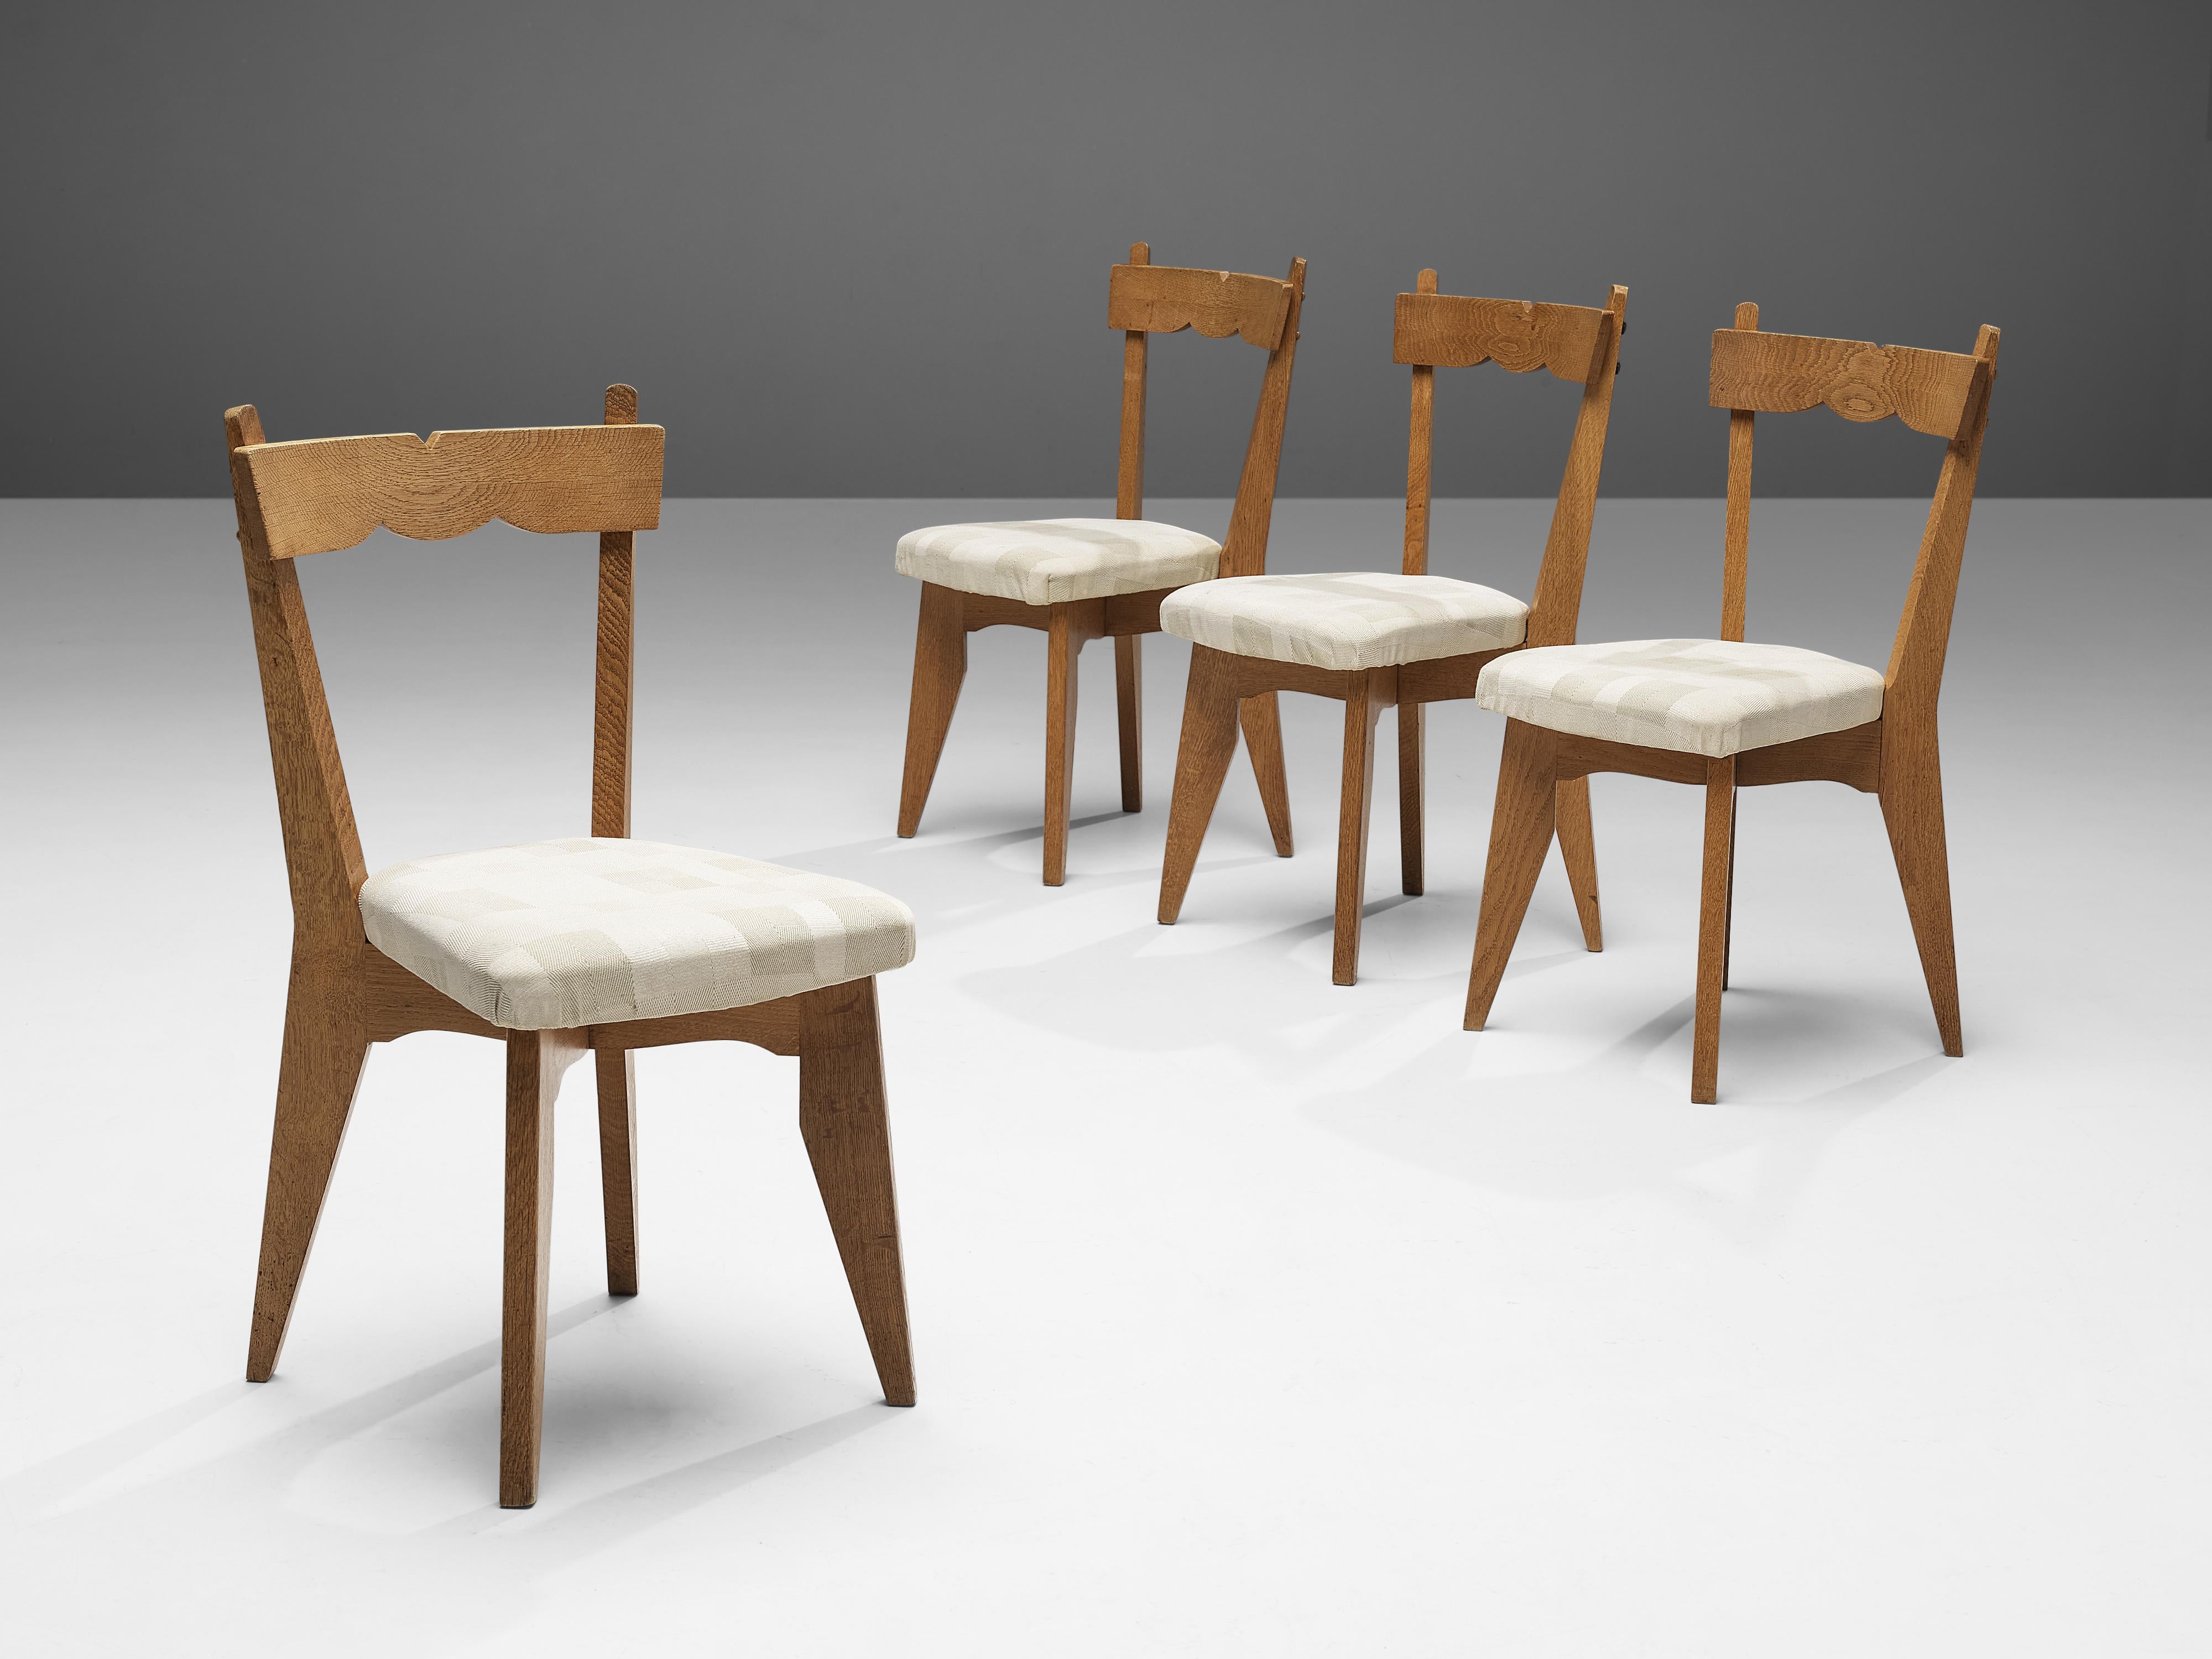 Guillerme et Chambron, set of four dining chairs, solid oak, fabric upholstery, France, 1960s

These dining chairs in solid oak are designed by the French designer duo Jacques Chambron and Robert Guillerme. On four tapered legs rests the seating